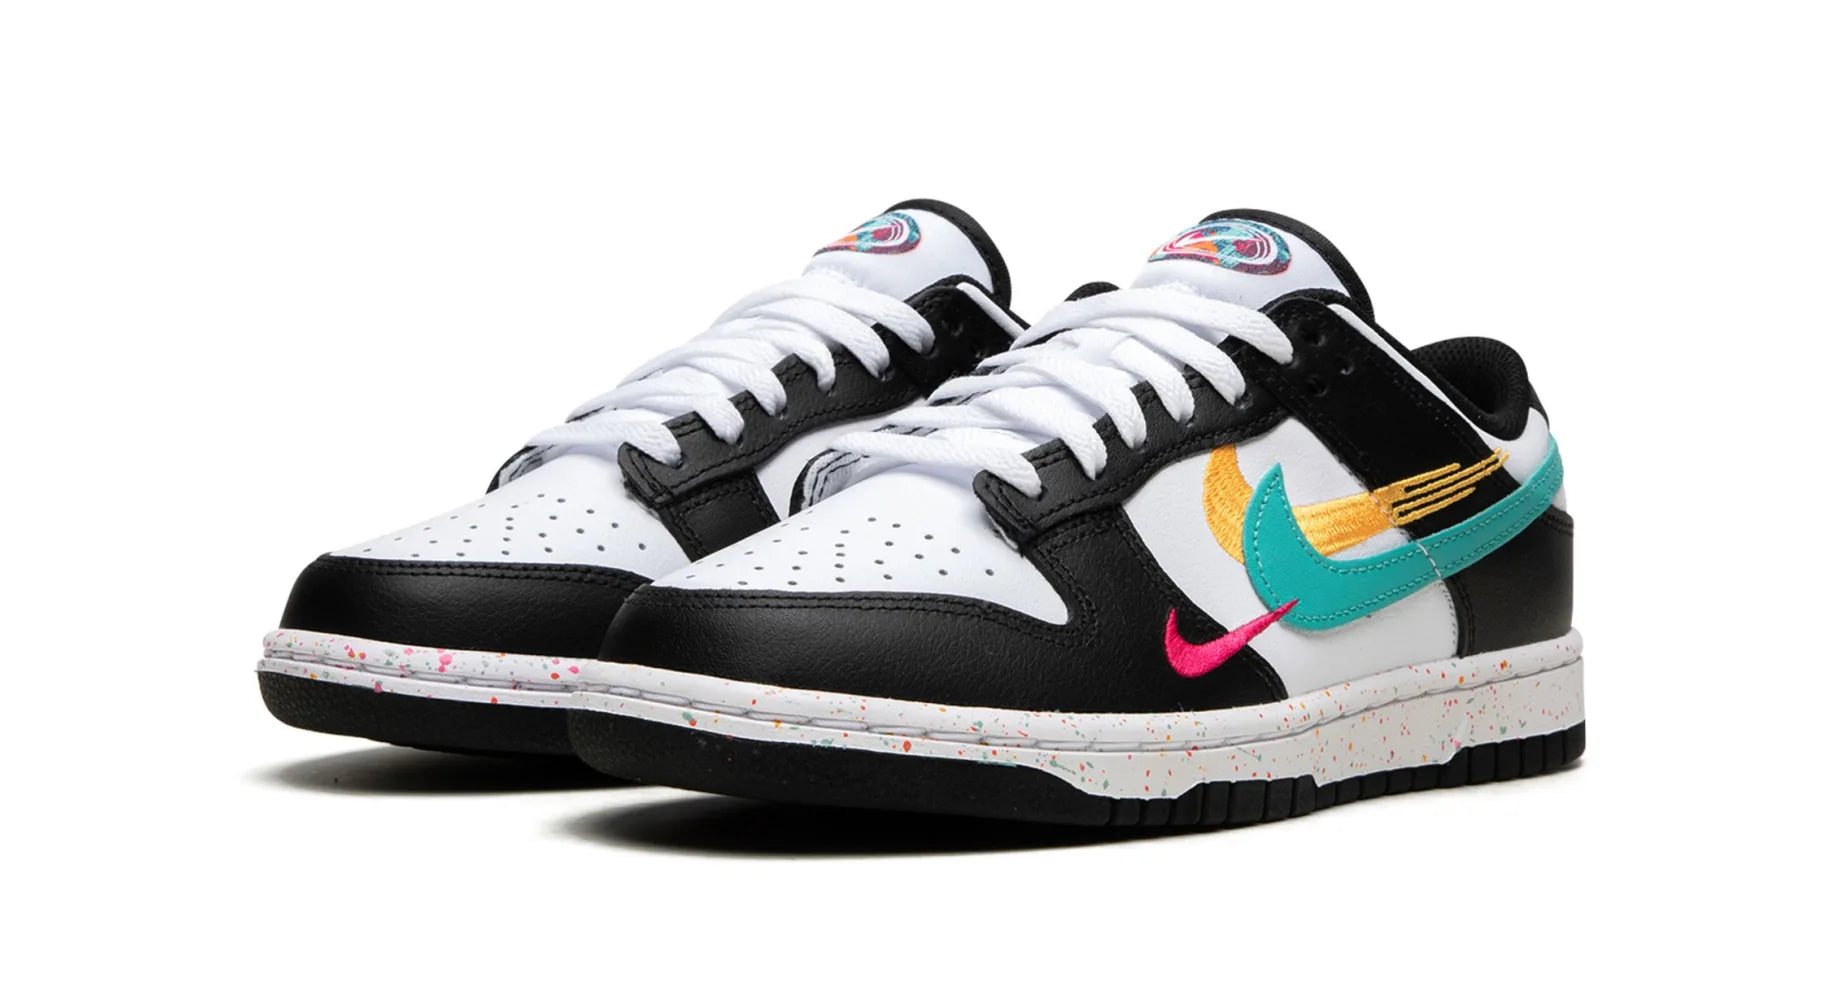 Nike Dunk Low Multiple Swooshes White Washed Teal (W)